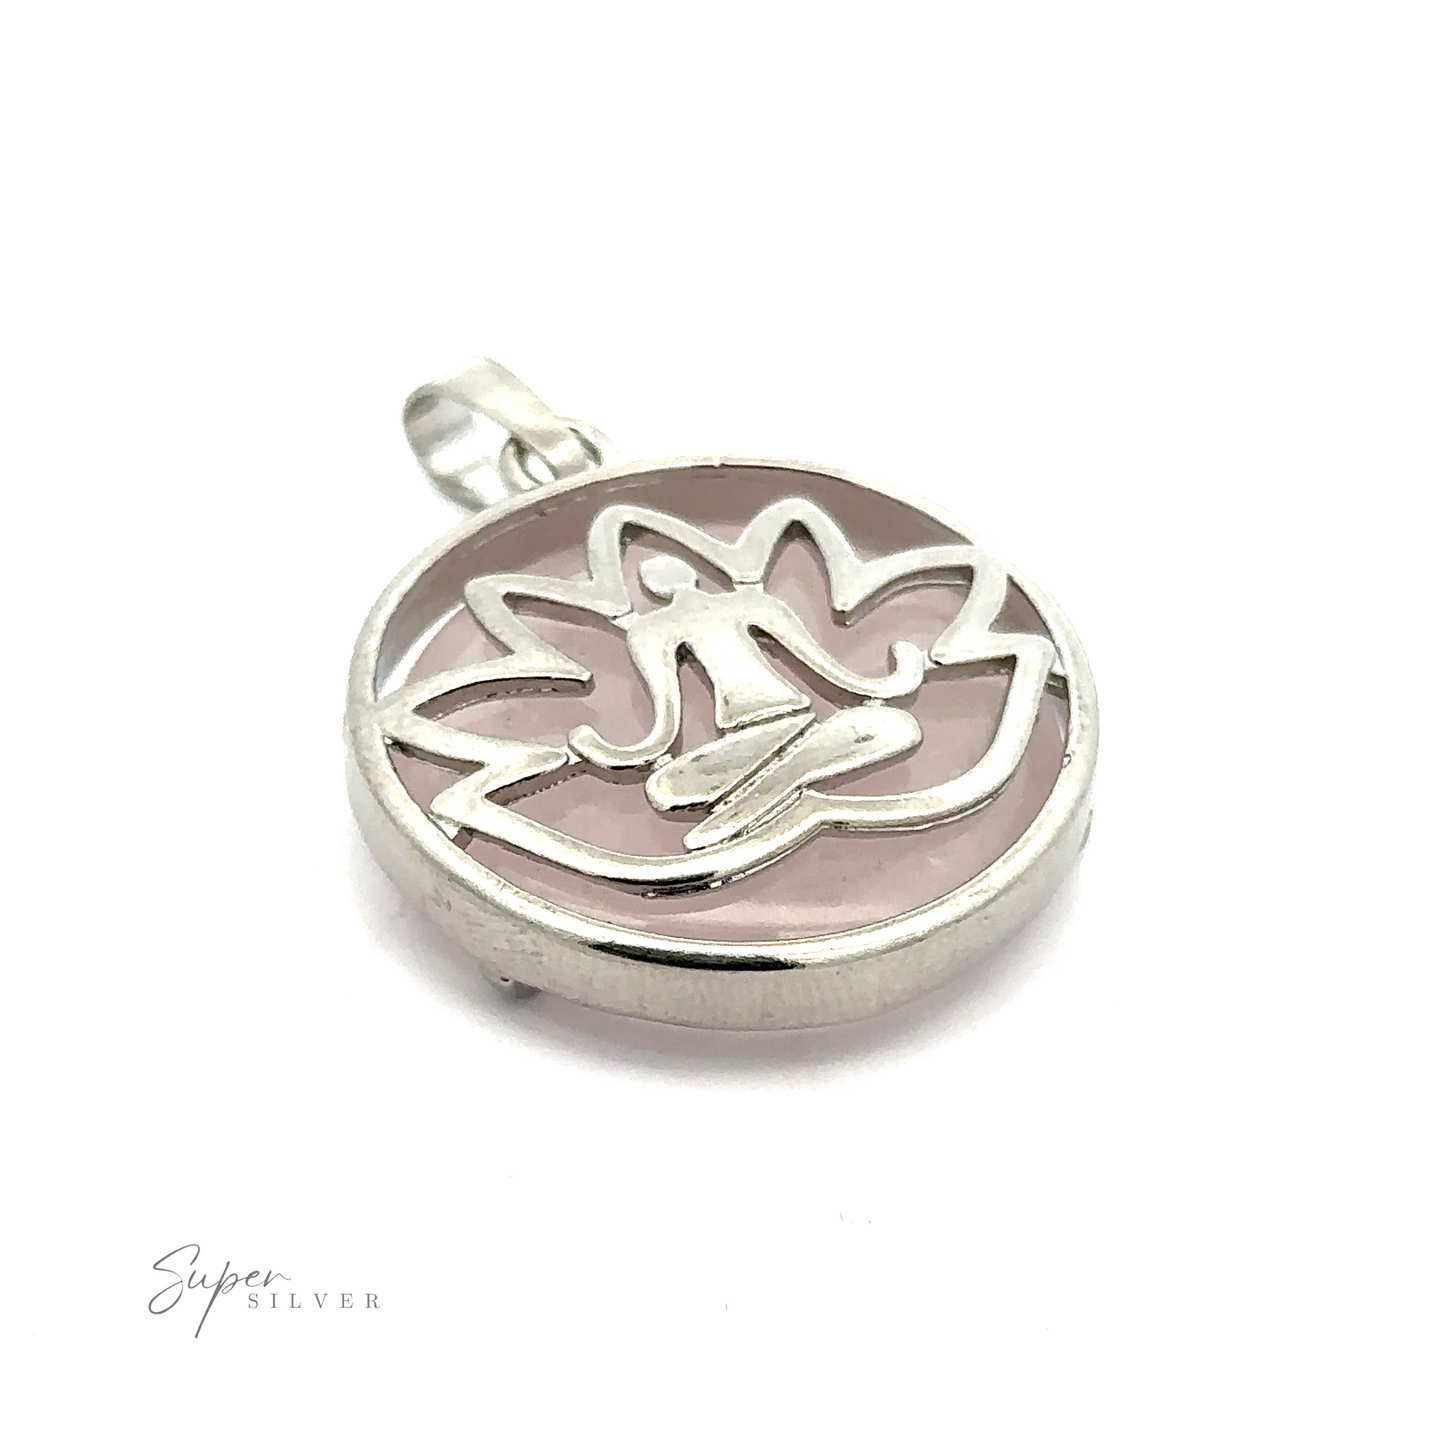 
                  
                    Silver Plated Lotus Meditation Pendant with Gemstone featuring an open lotus design of a seated meditating figure, enhanced with a round gemstone at the center, all set against a pink background.
                  
                